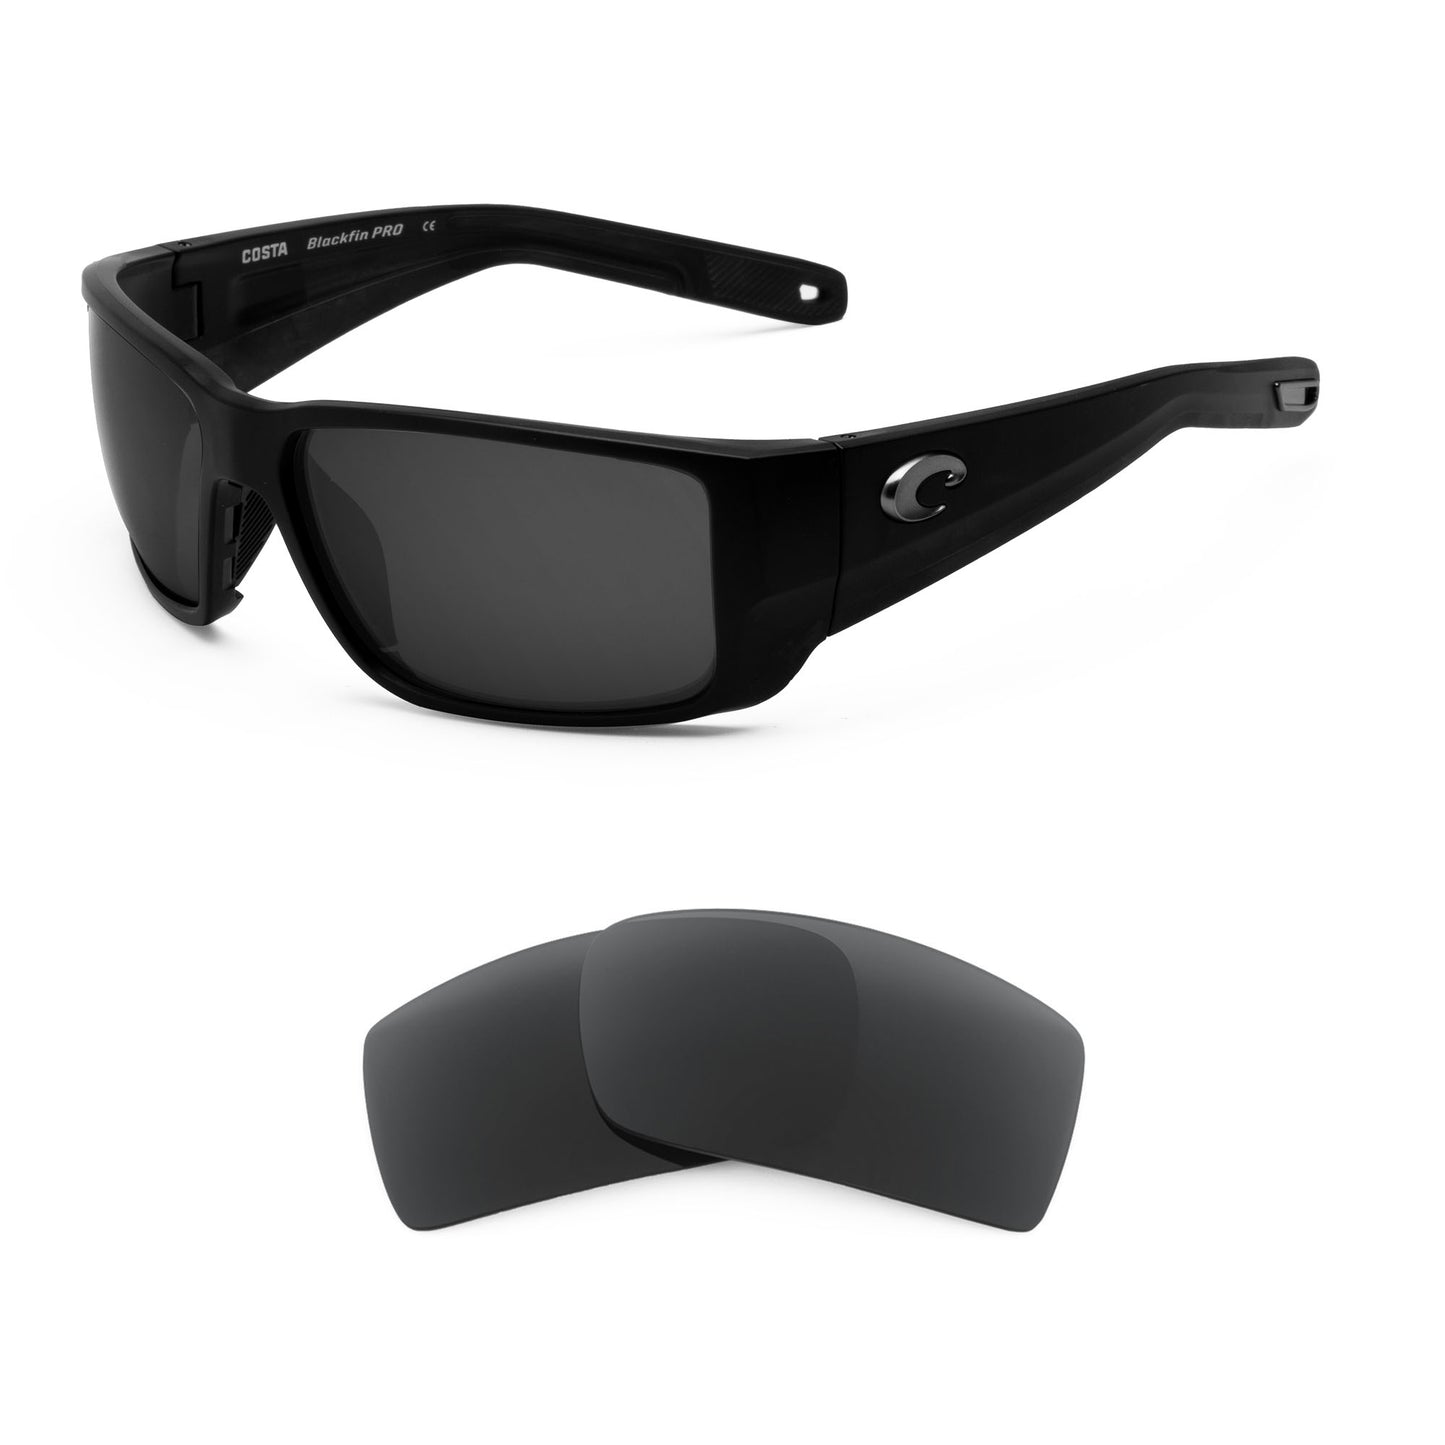 Costa Blackfin Pro sunglasses with replacement lenses